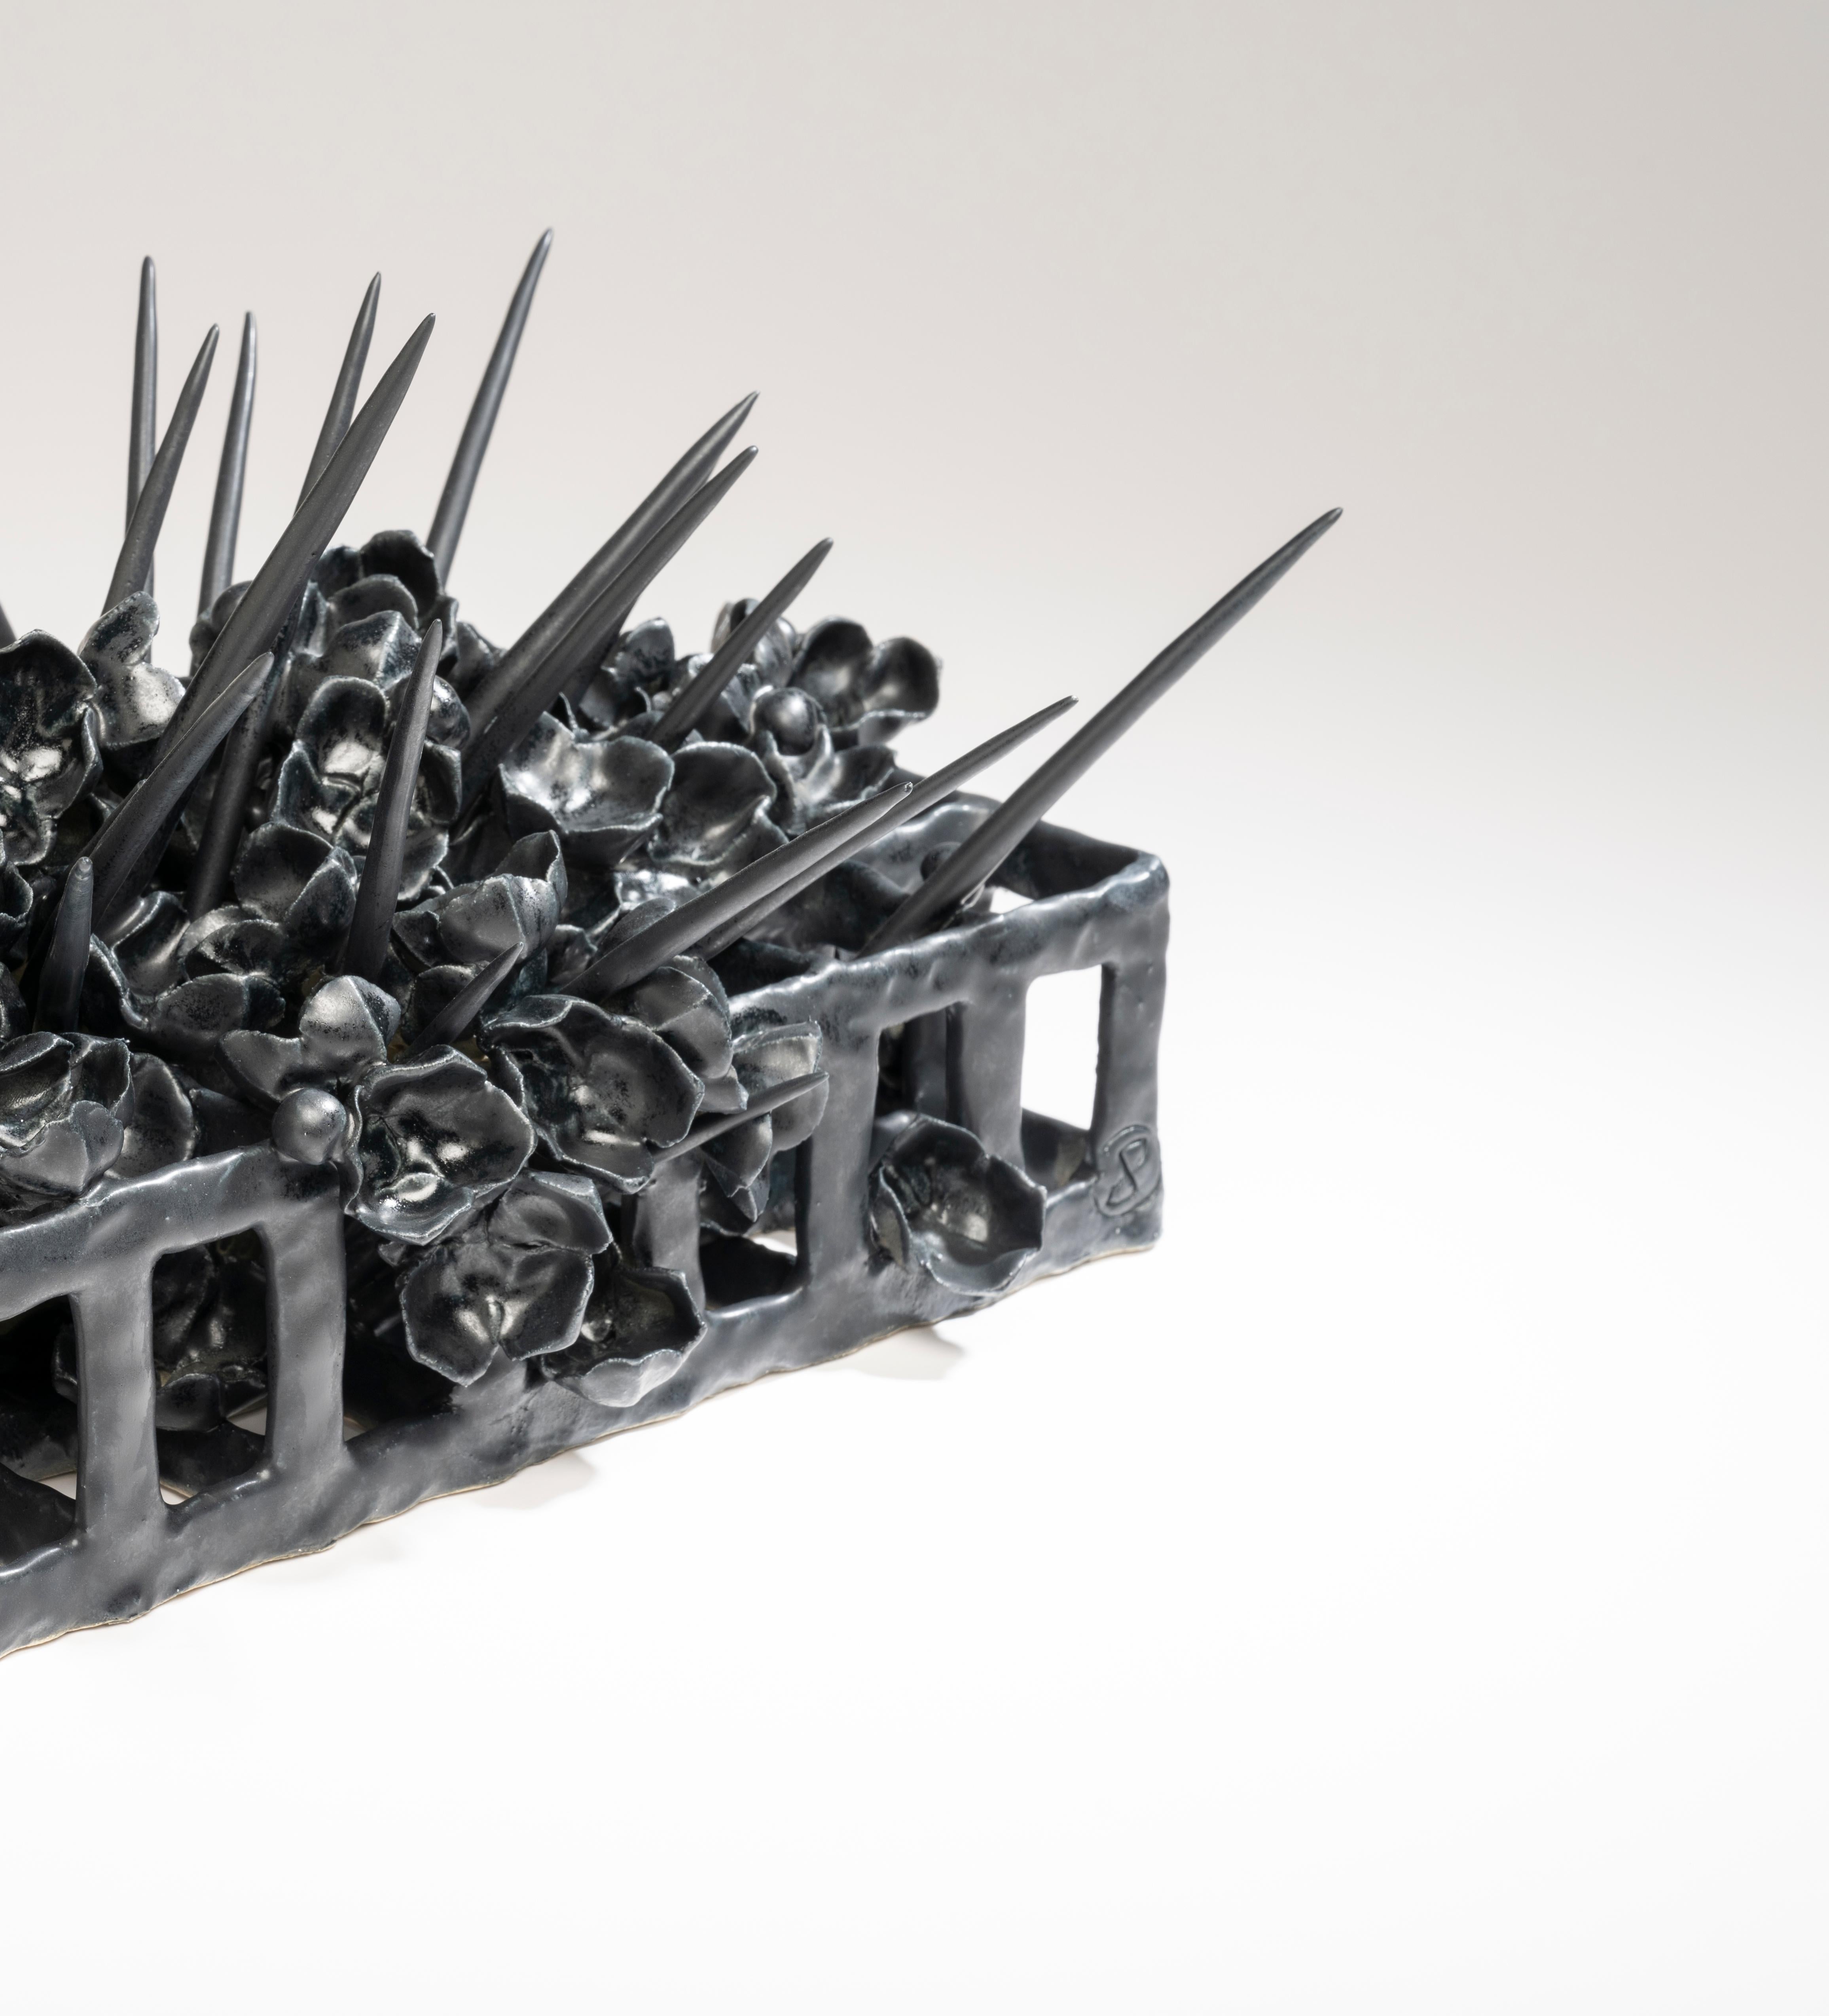 Glazed Joanna Poag Binding Time (Black Grid with Quills) Ceramic Sculpture, 2021 For Sale